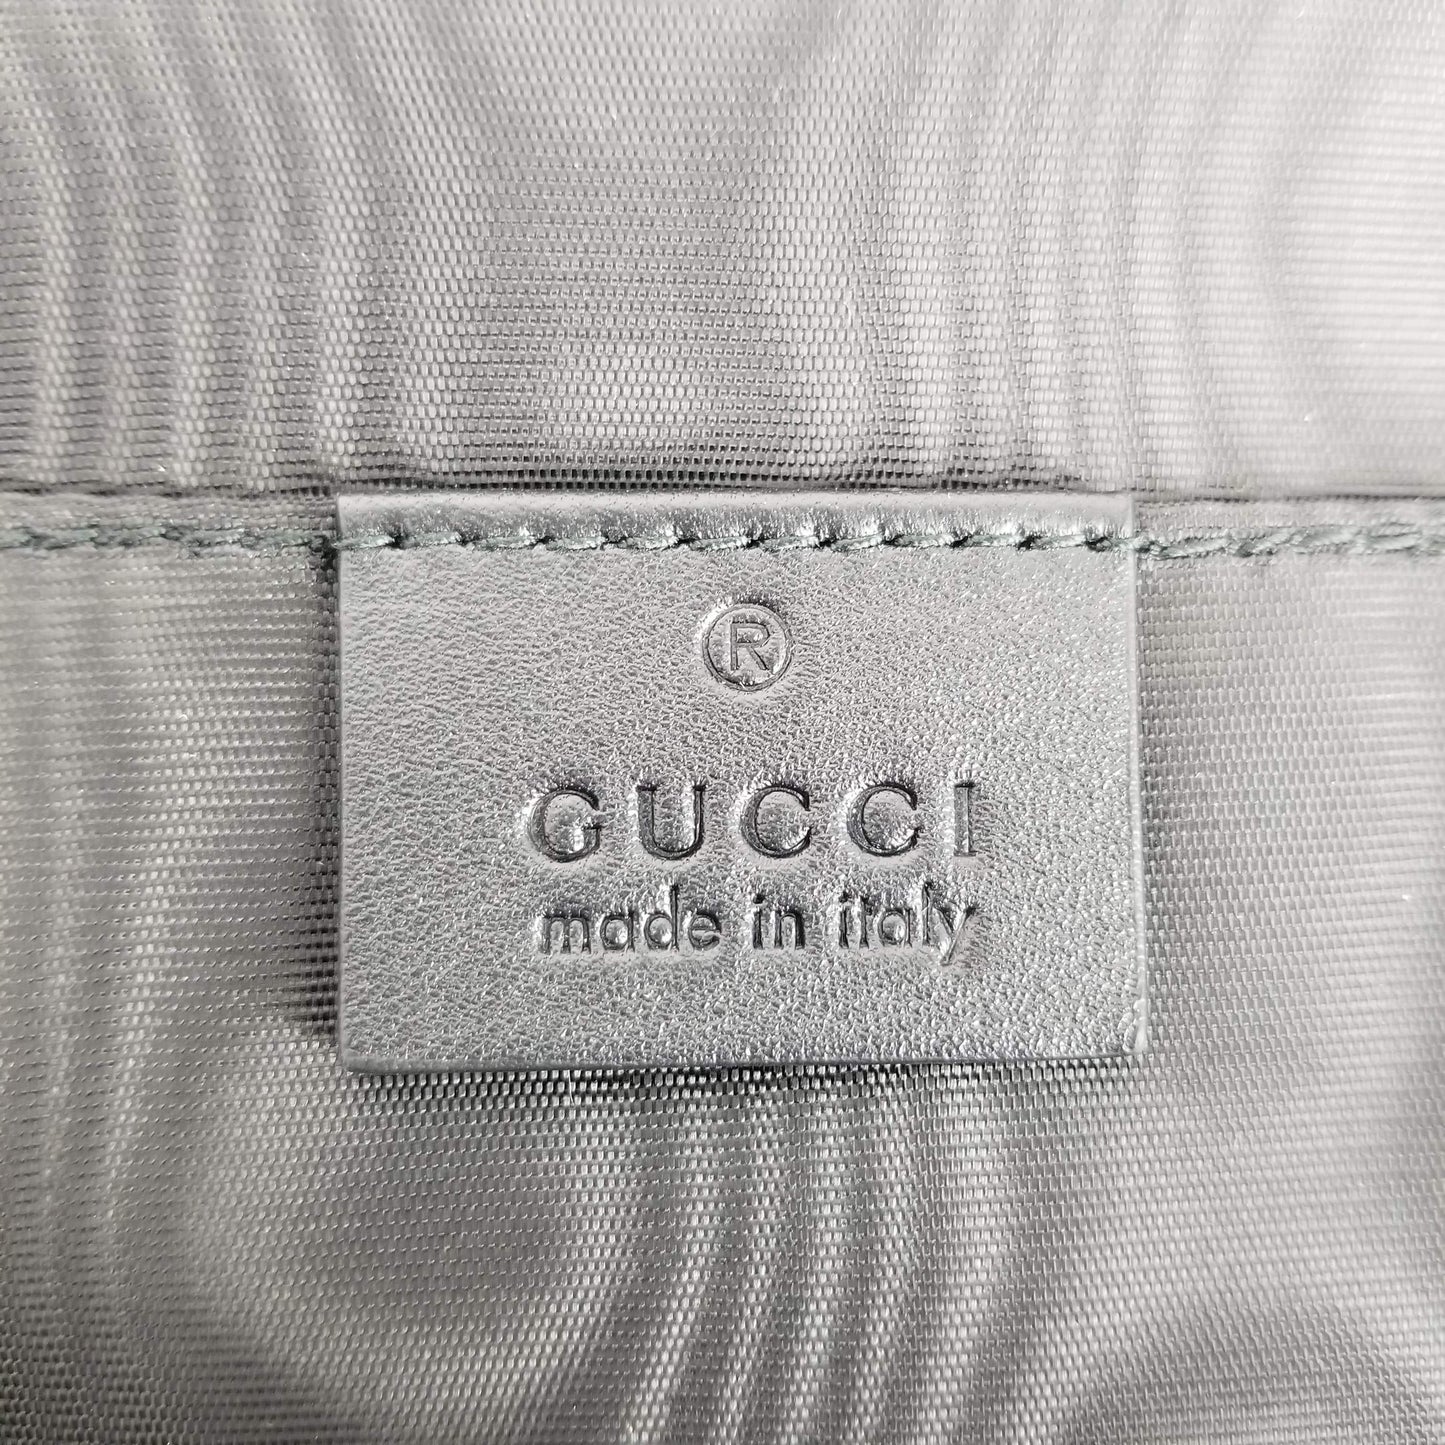 Authentic Gucci Guccy Mooncorn Pouch